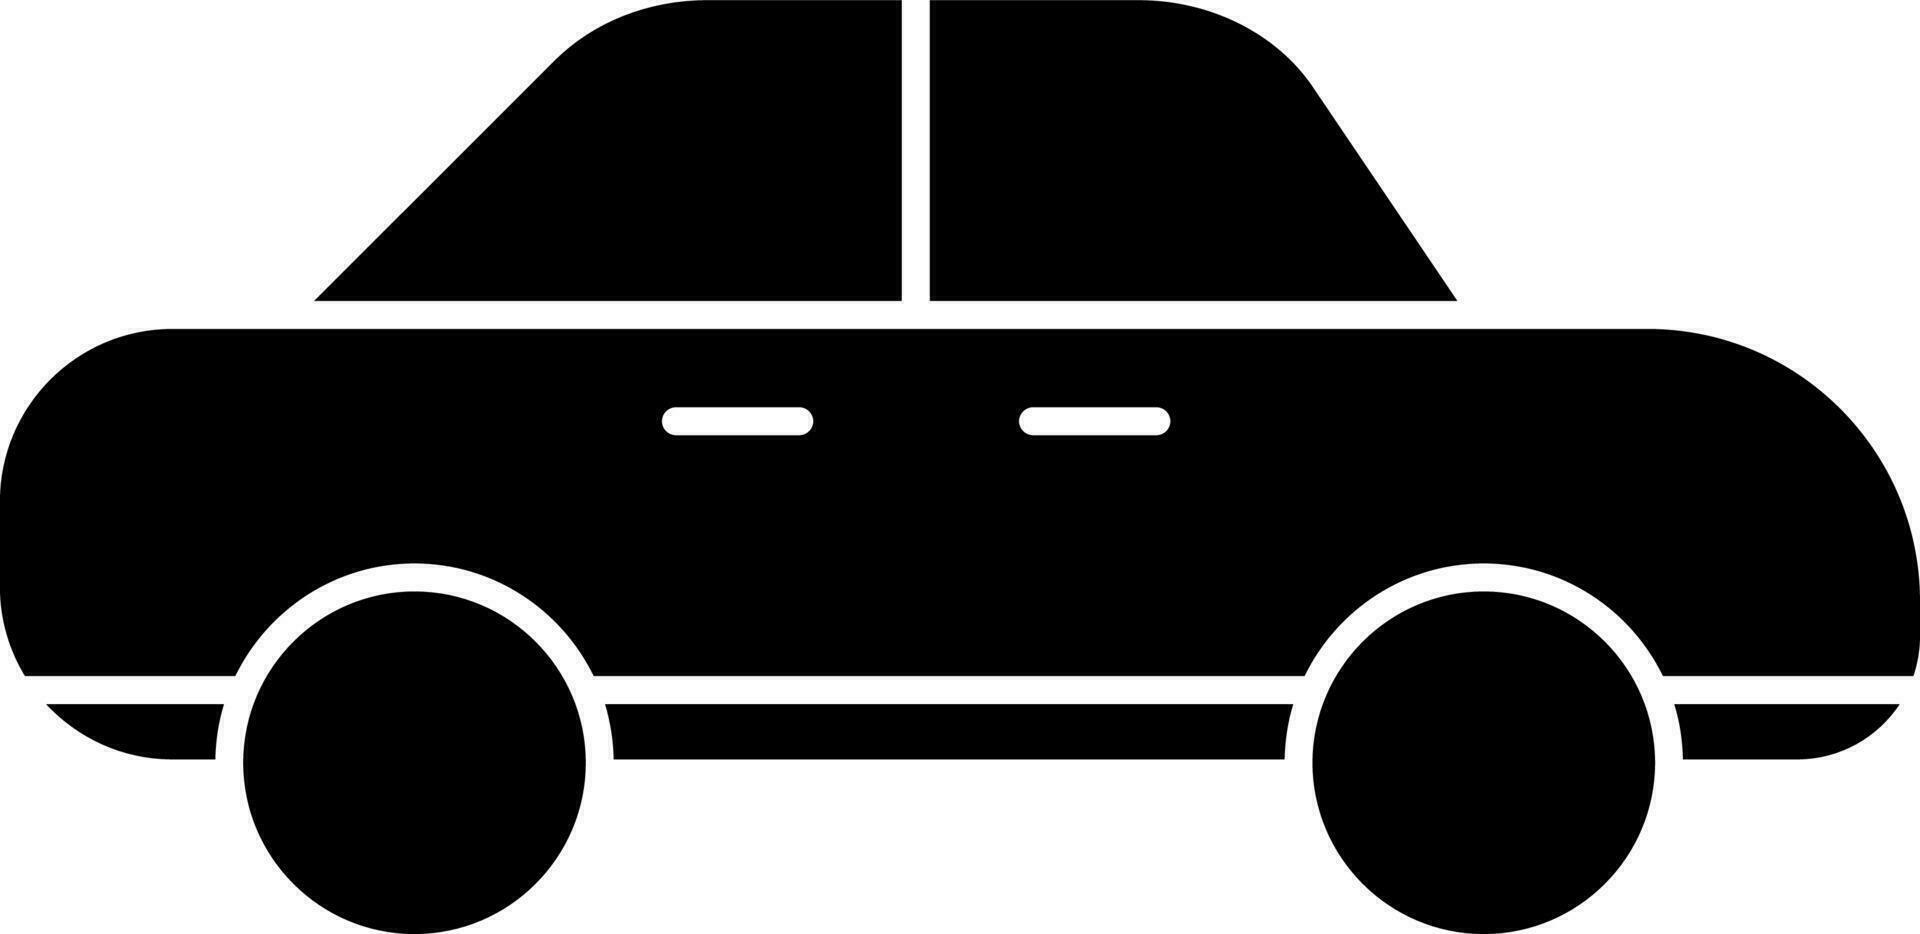 Black taxi car icon in flat style. vector